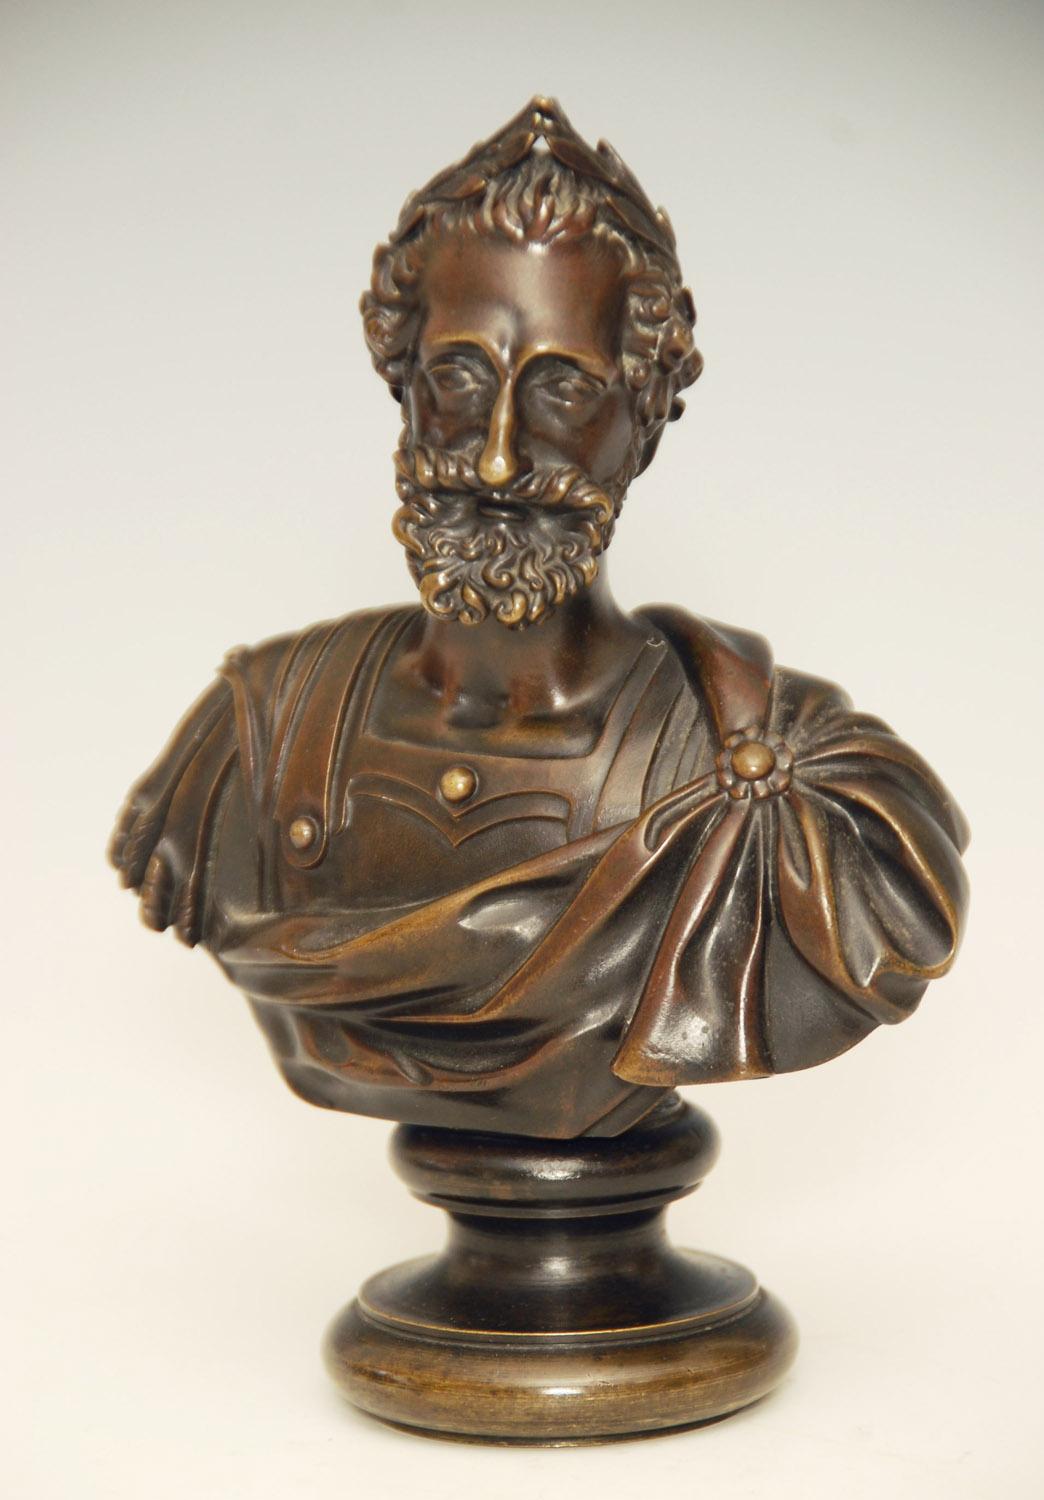 A small French bronze of a Roman male, late 19th century, superbly detailed cast.

Measures: 6.75 inches high.

Price includes free shipping to anywhere in the world.